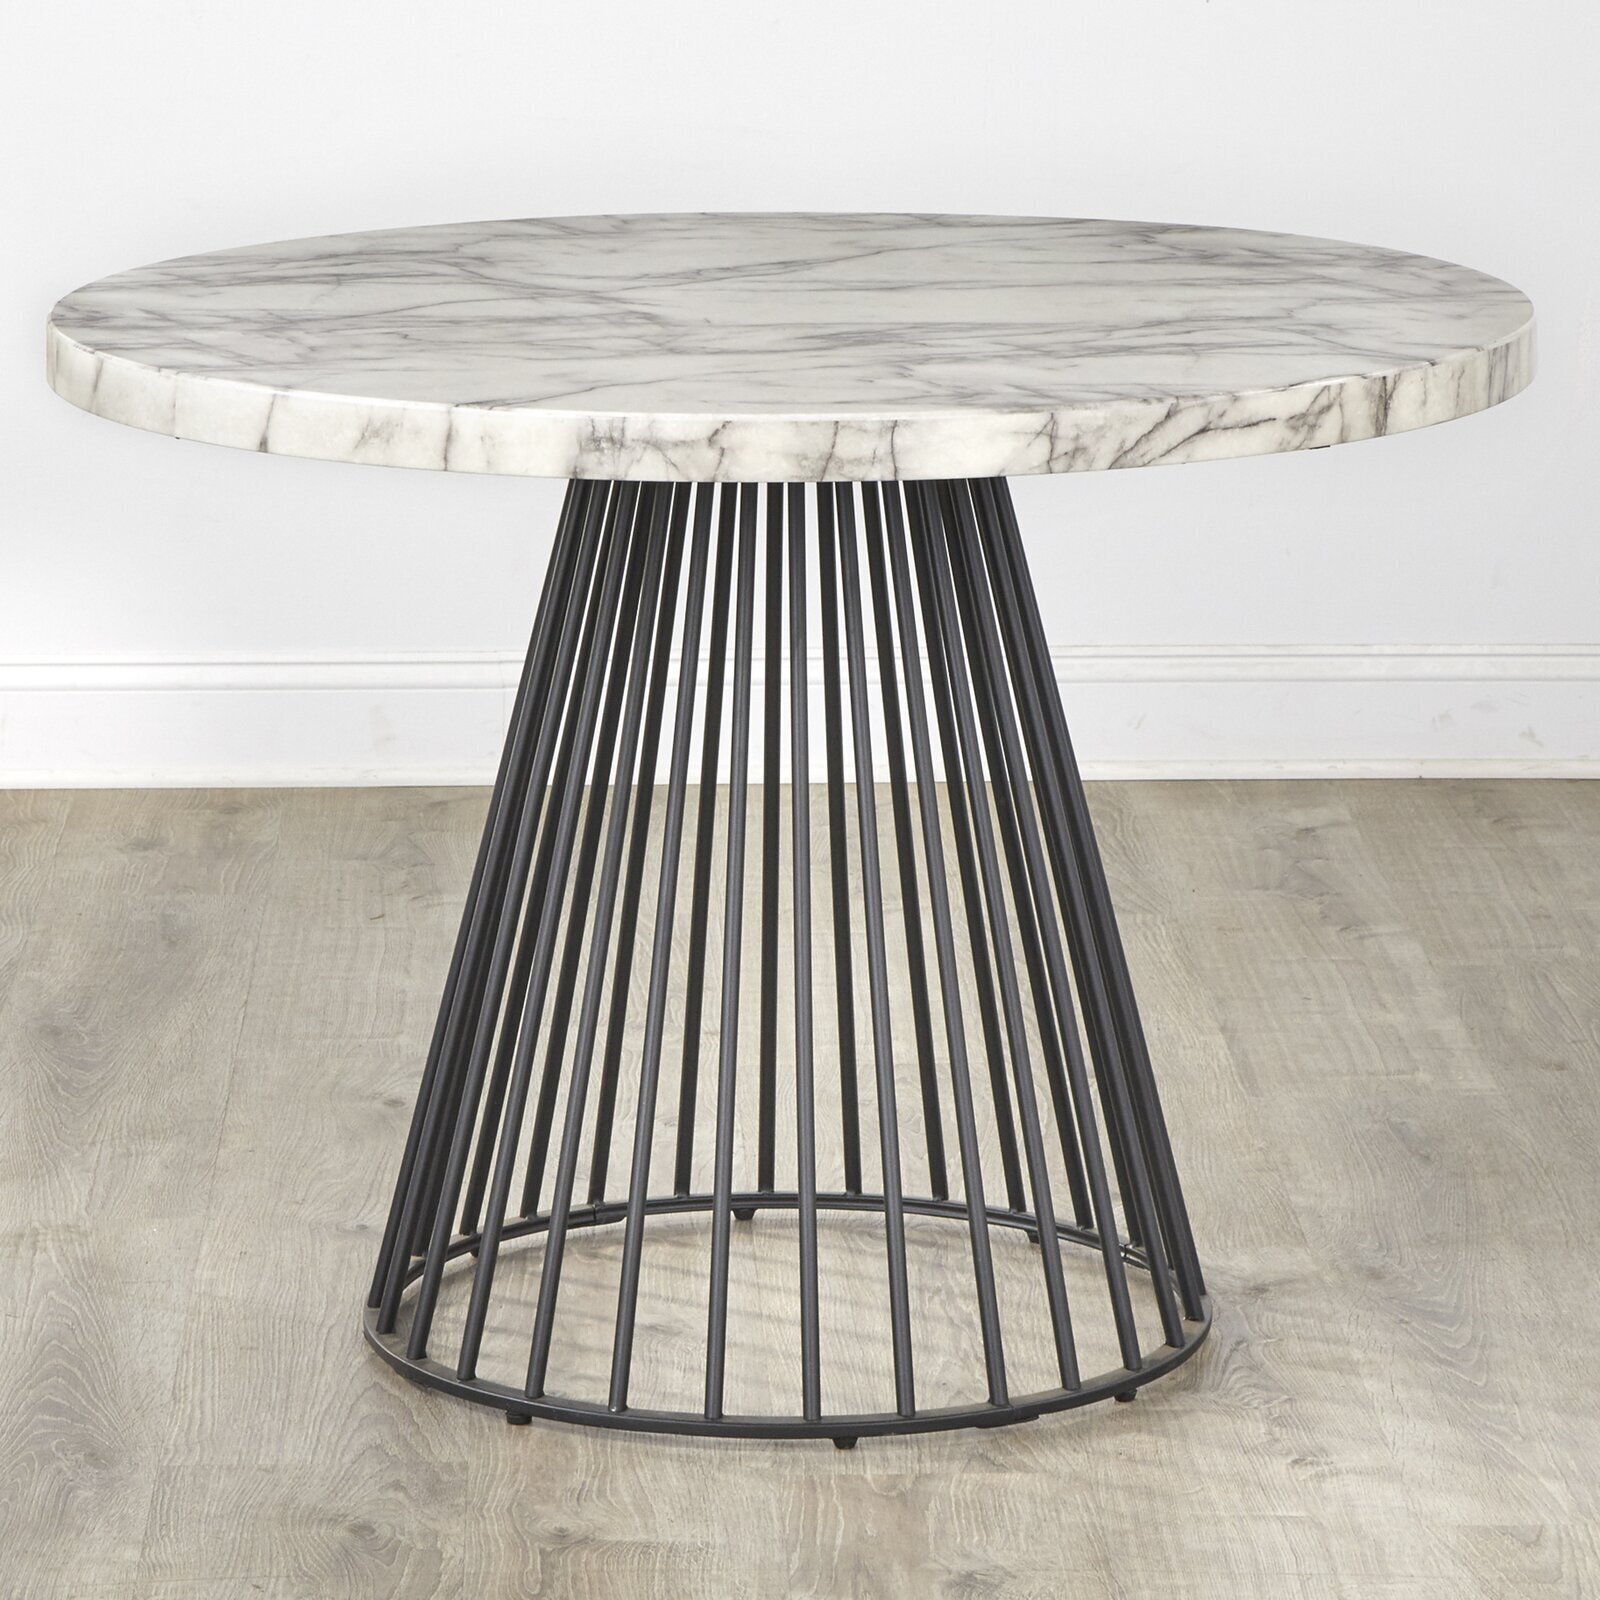 Stunning black and white marble dining table